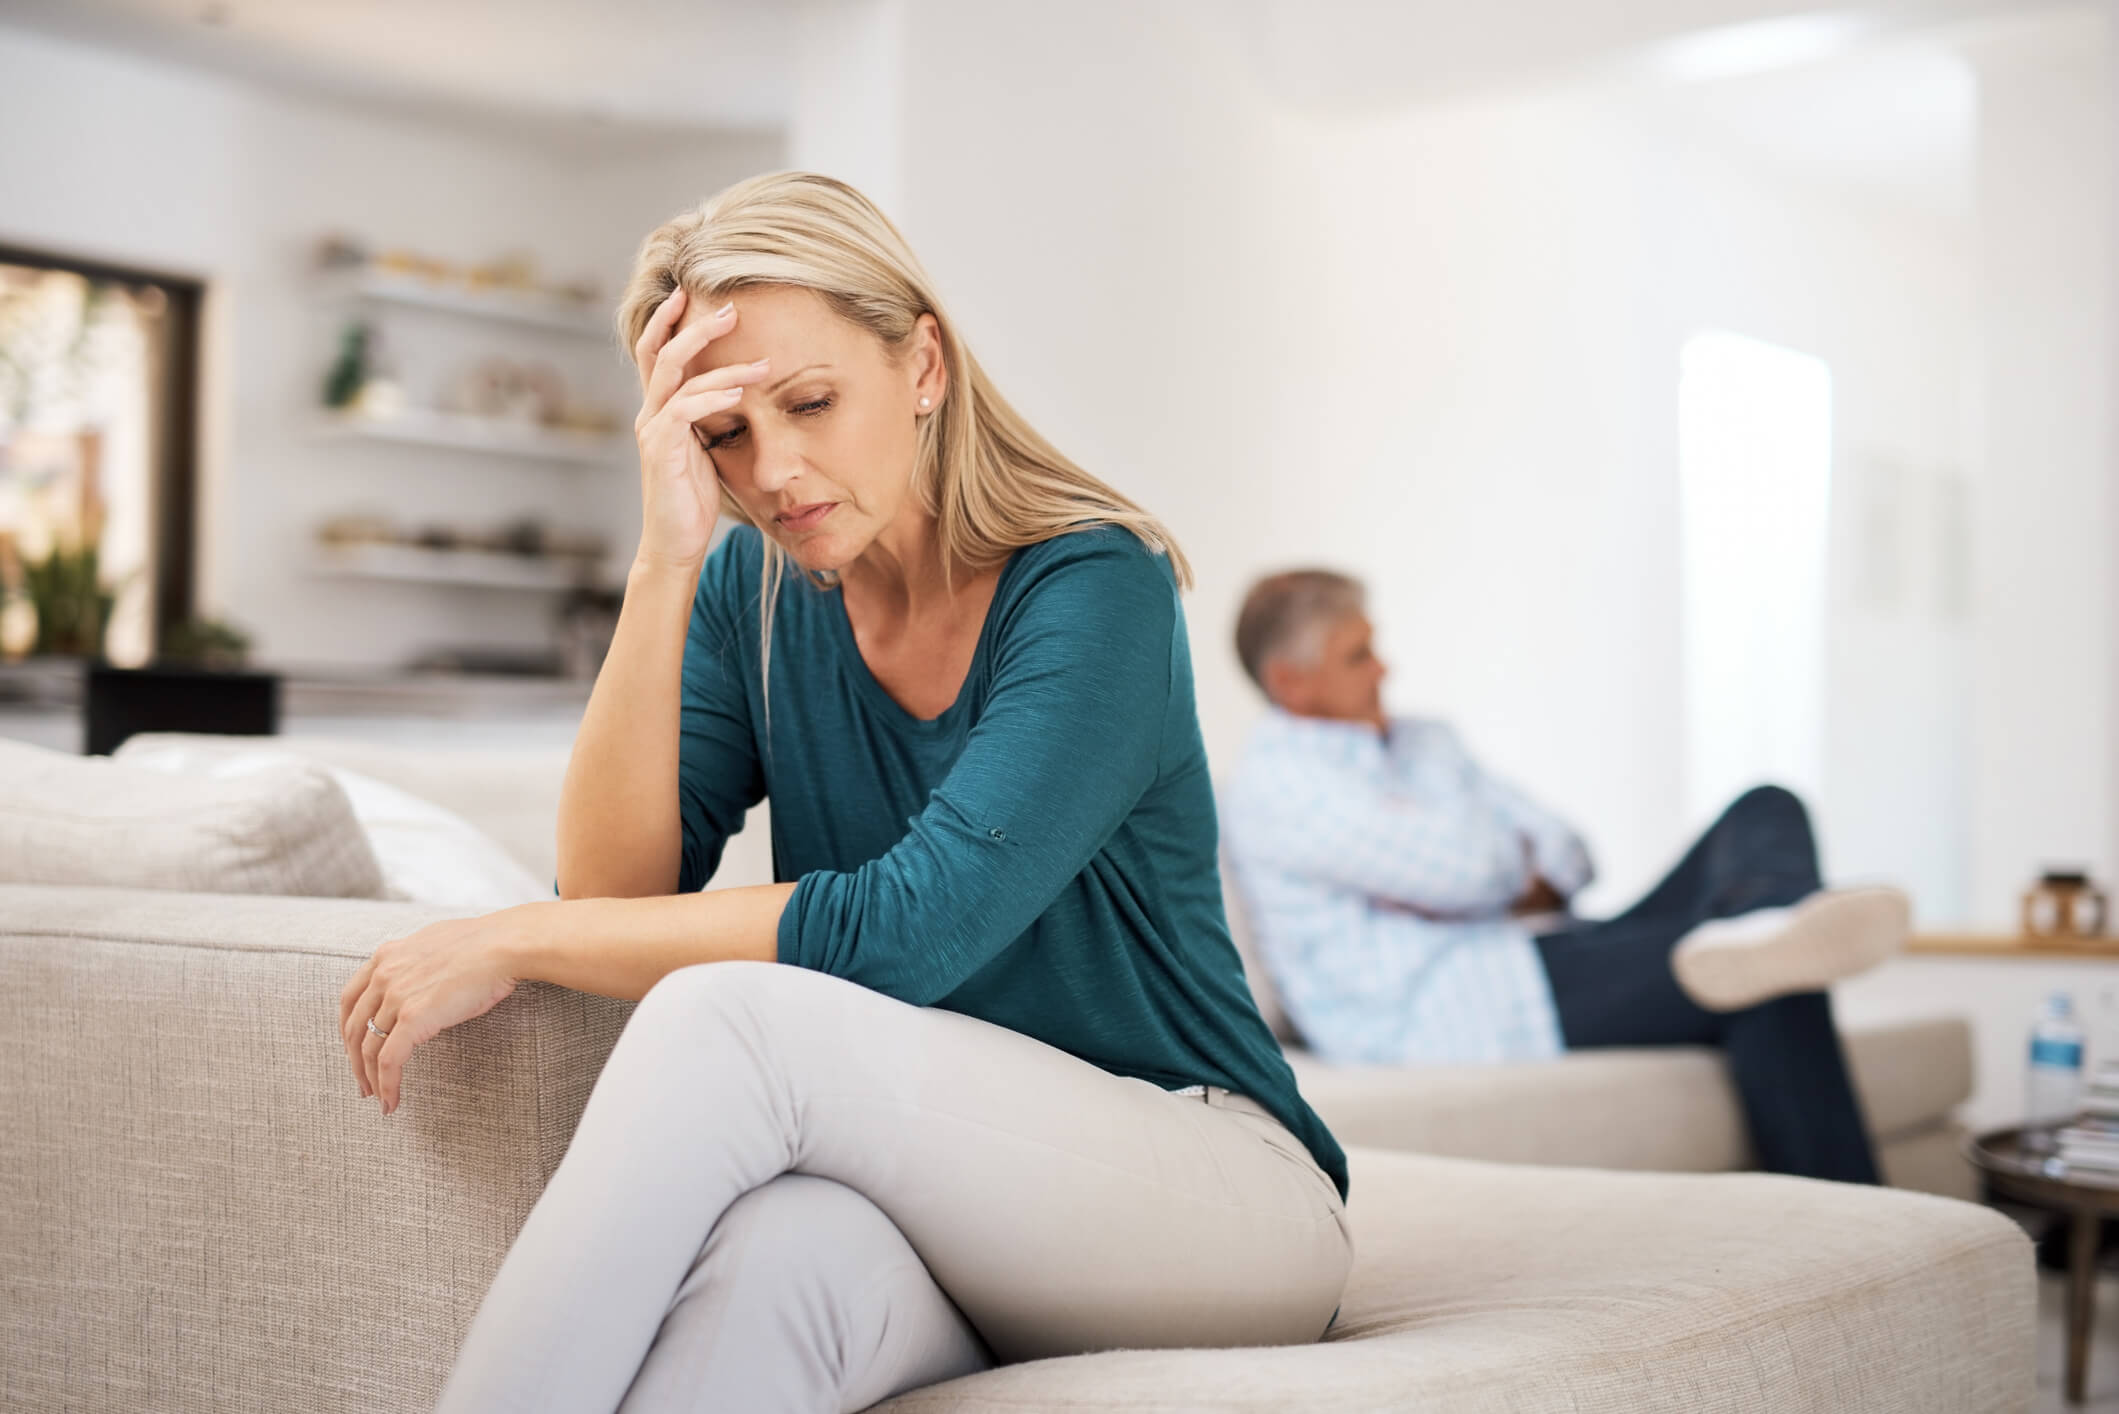 Oak Brook divorce attorney discusses what happens when you are considering reconciling after a divorce.